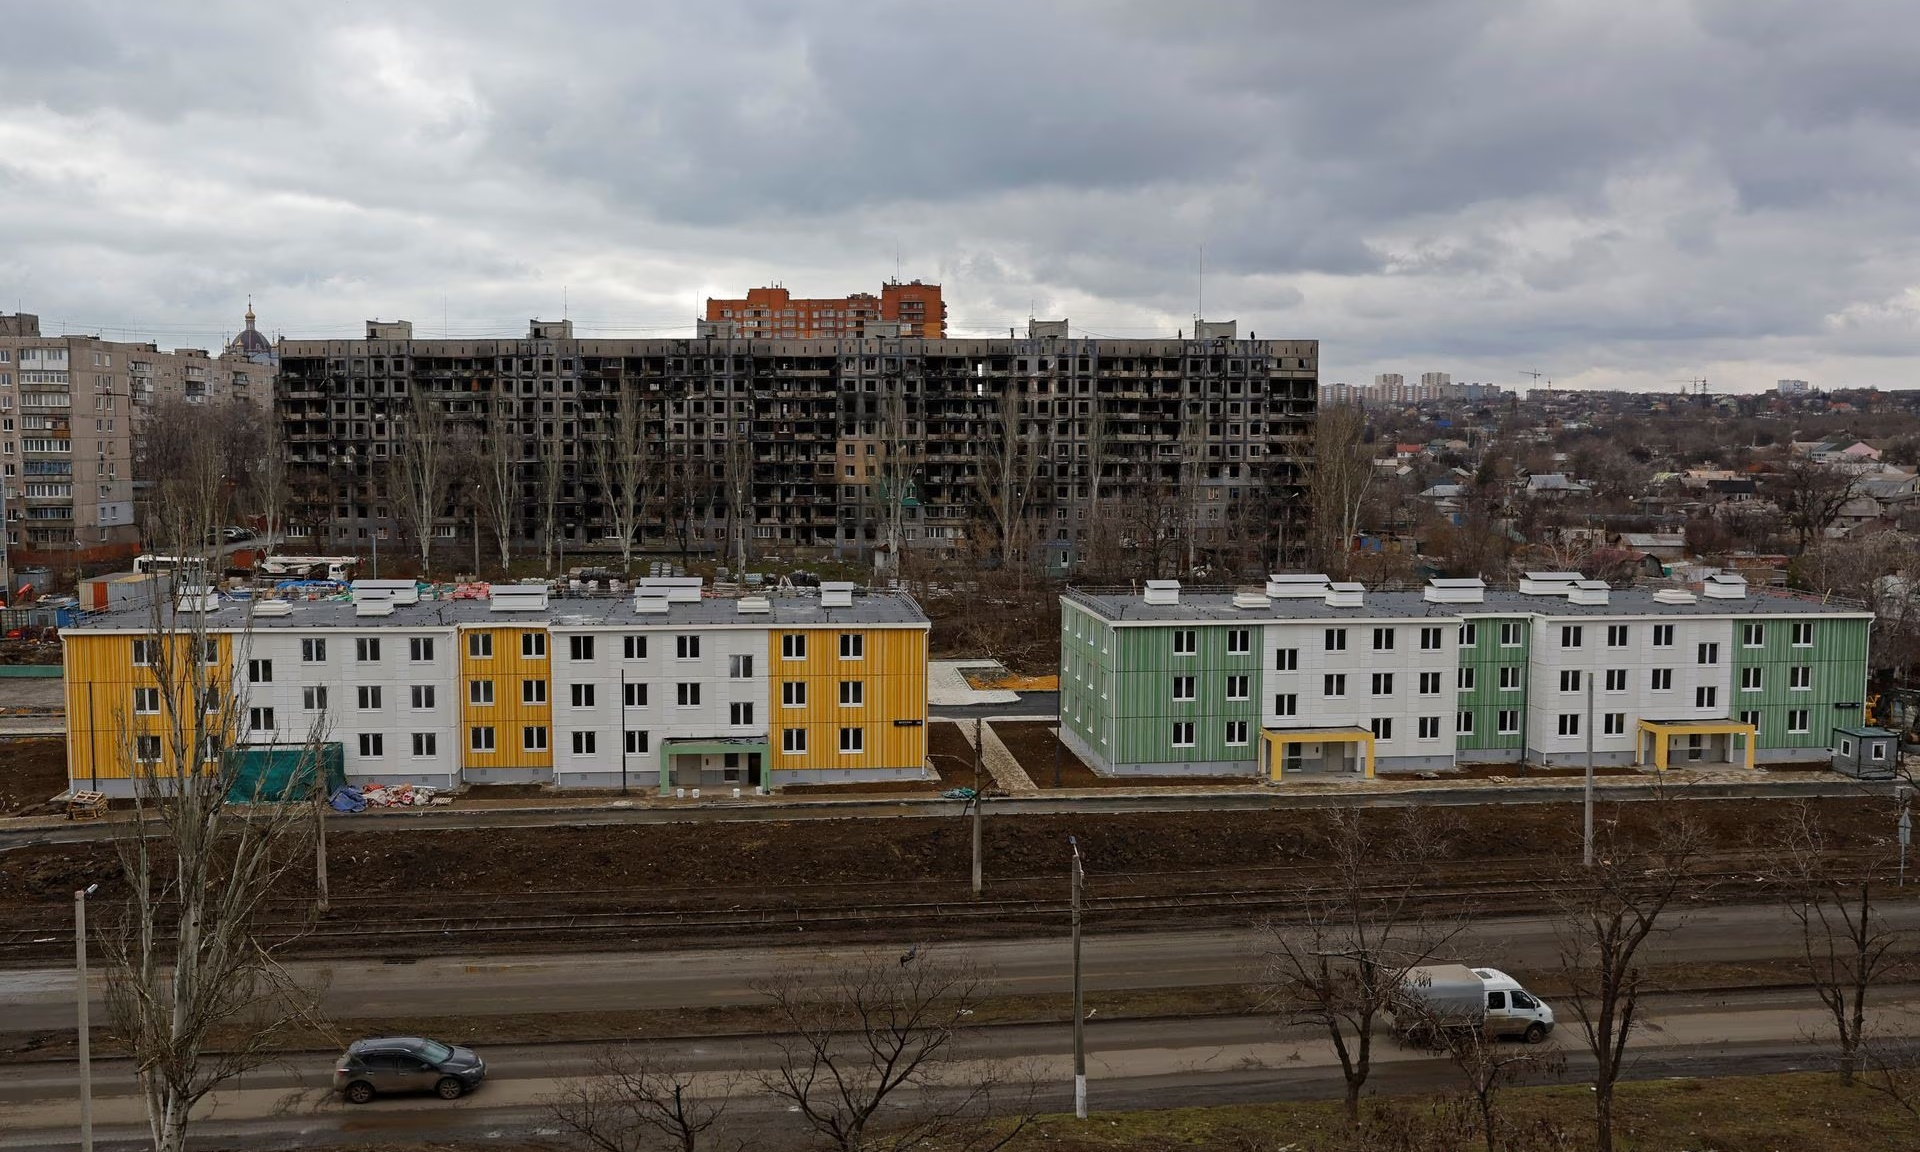 Existence in Mariupol after 10 months below Russian control